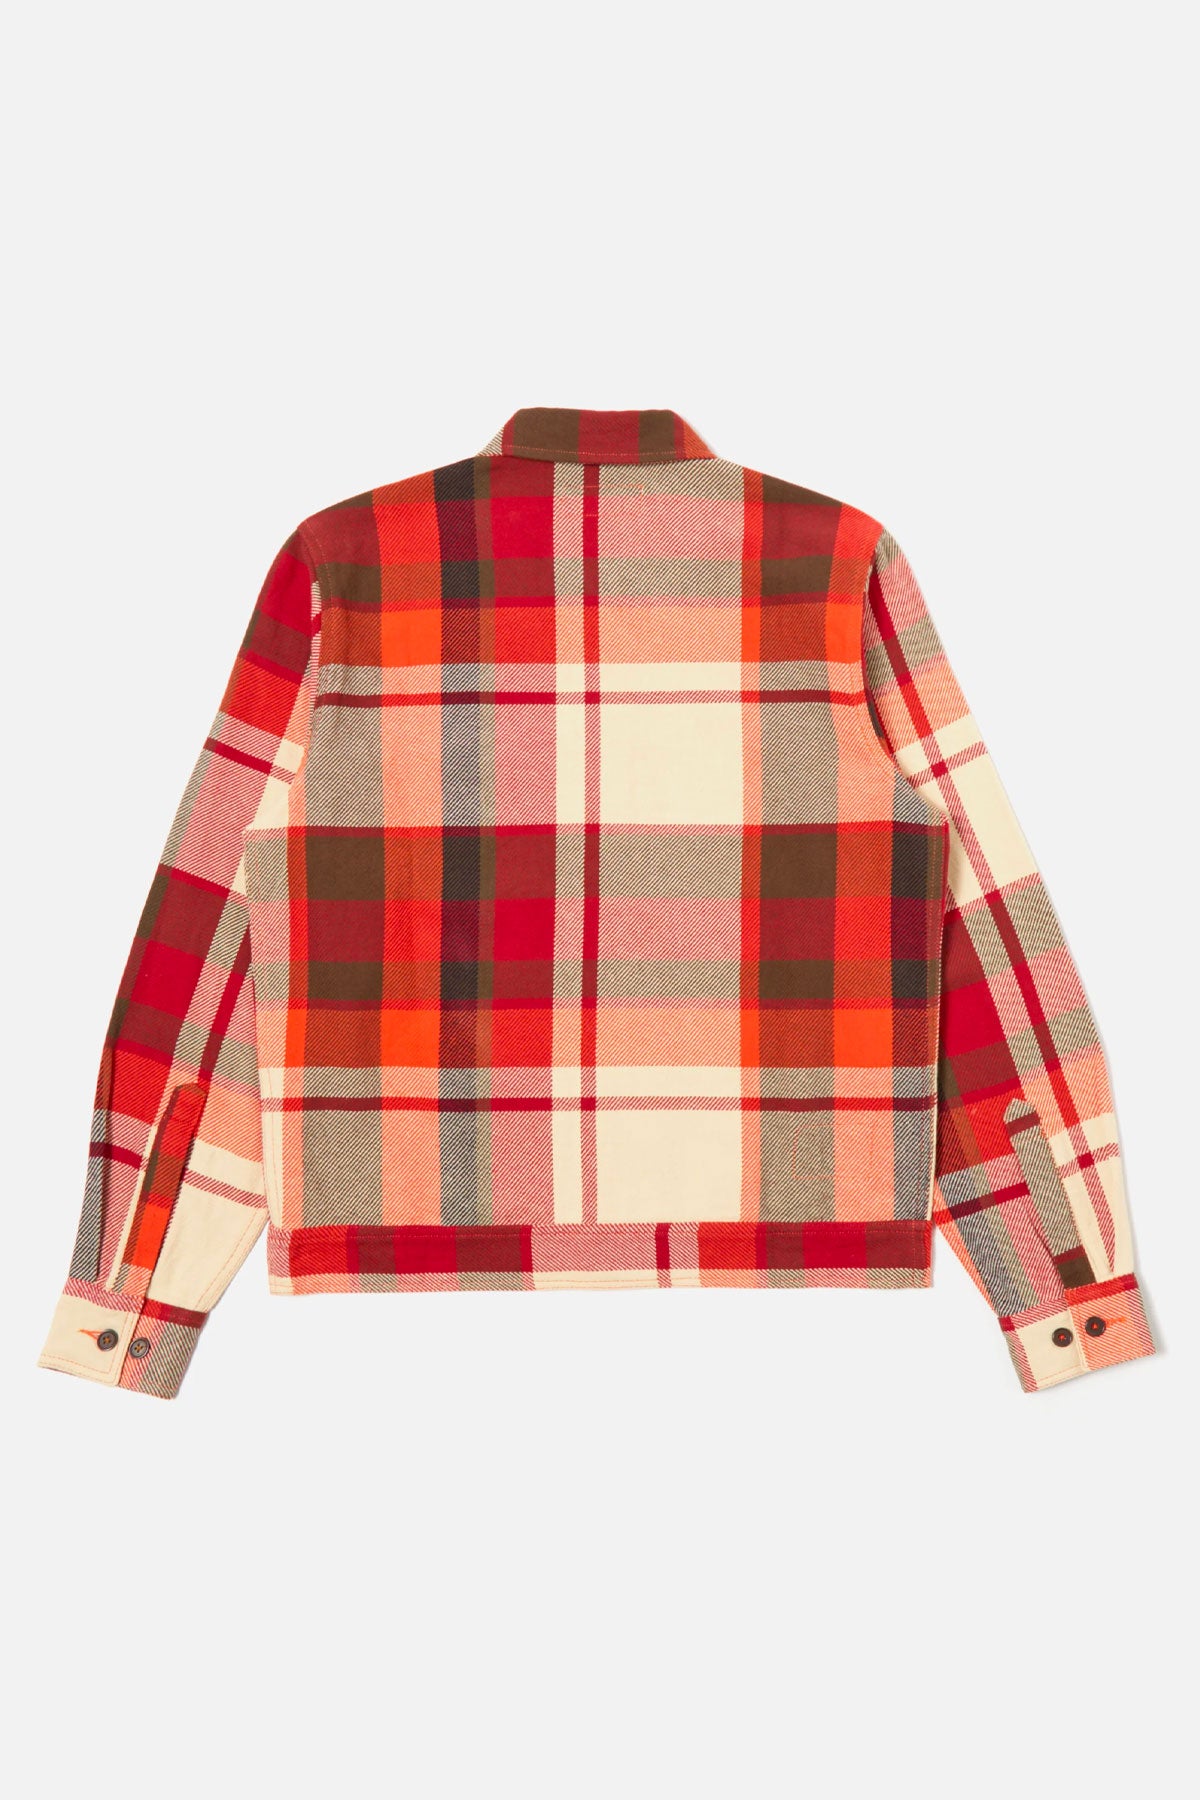 Universal Works - Uniform Shirt In Red Earth Check